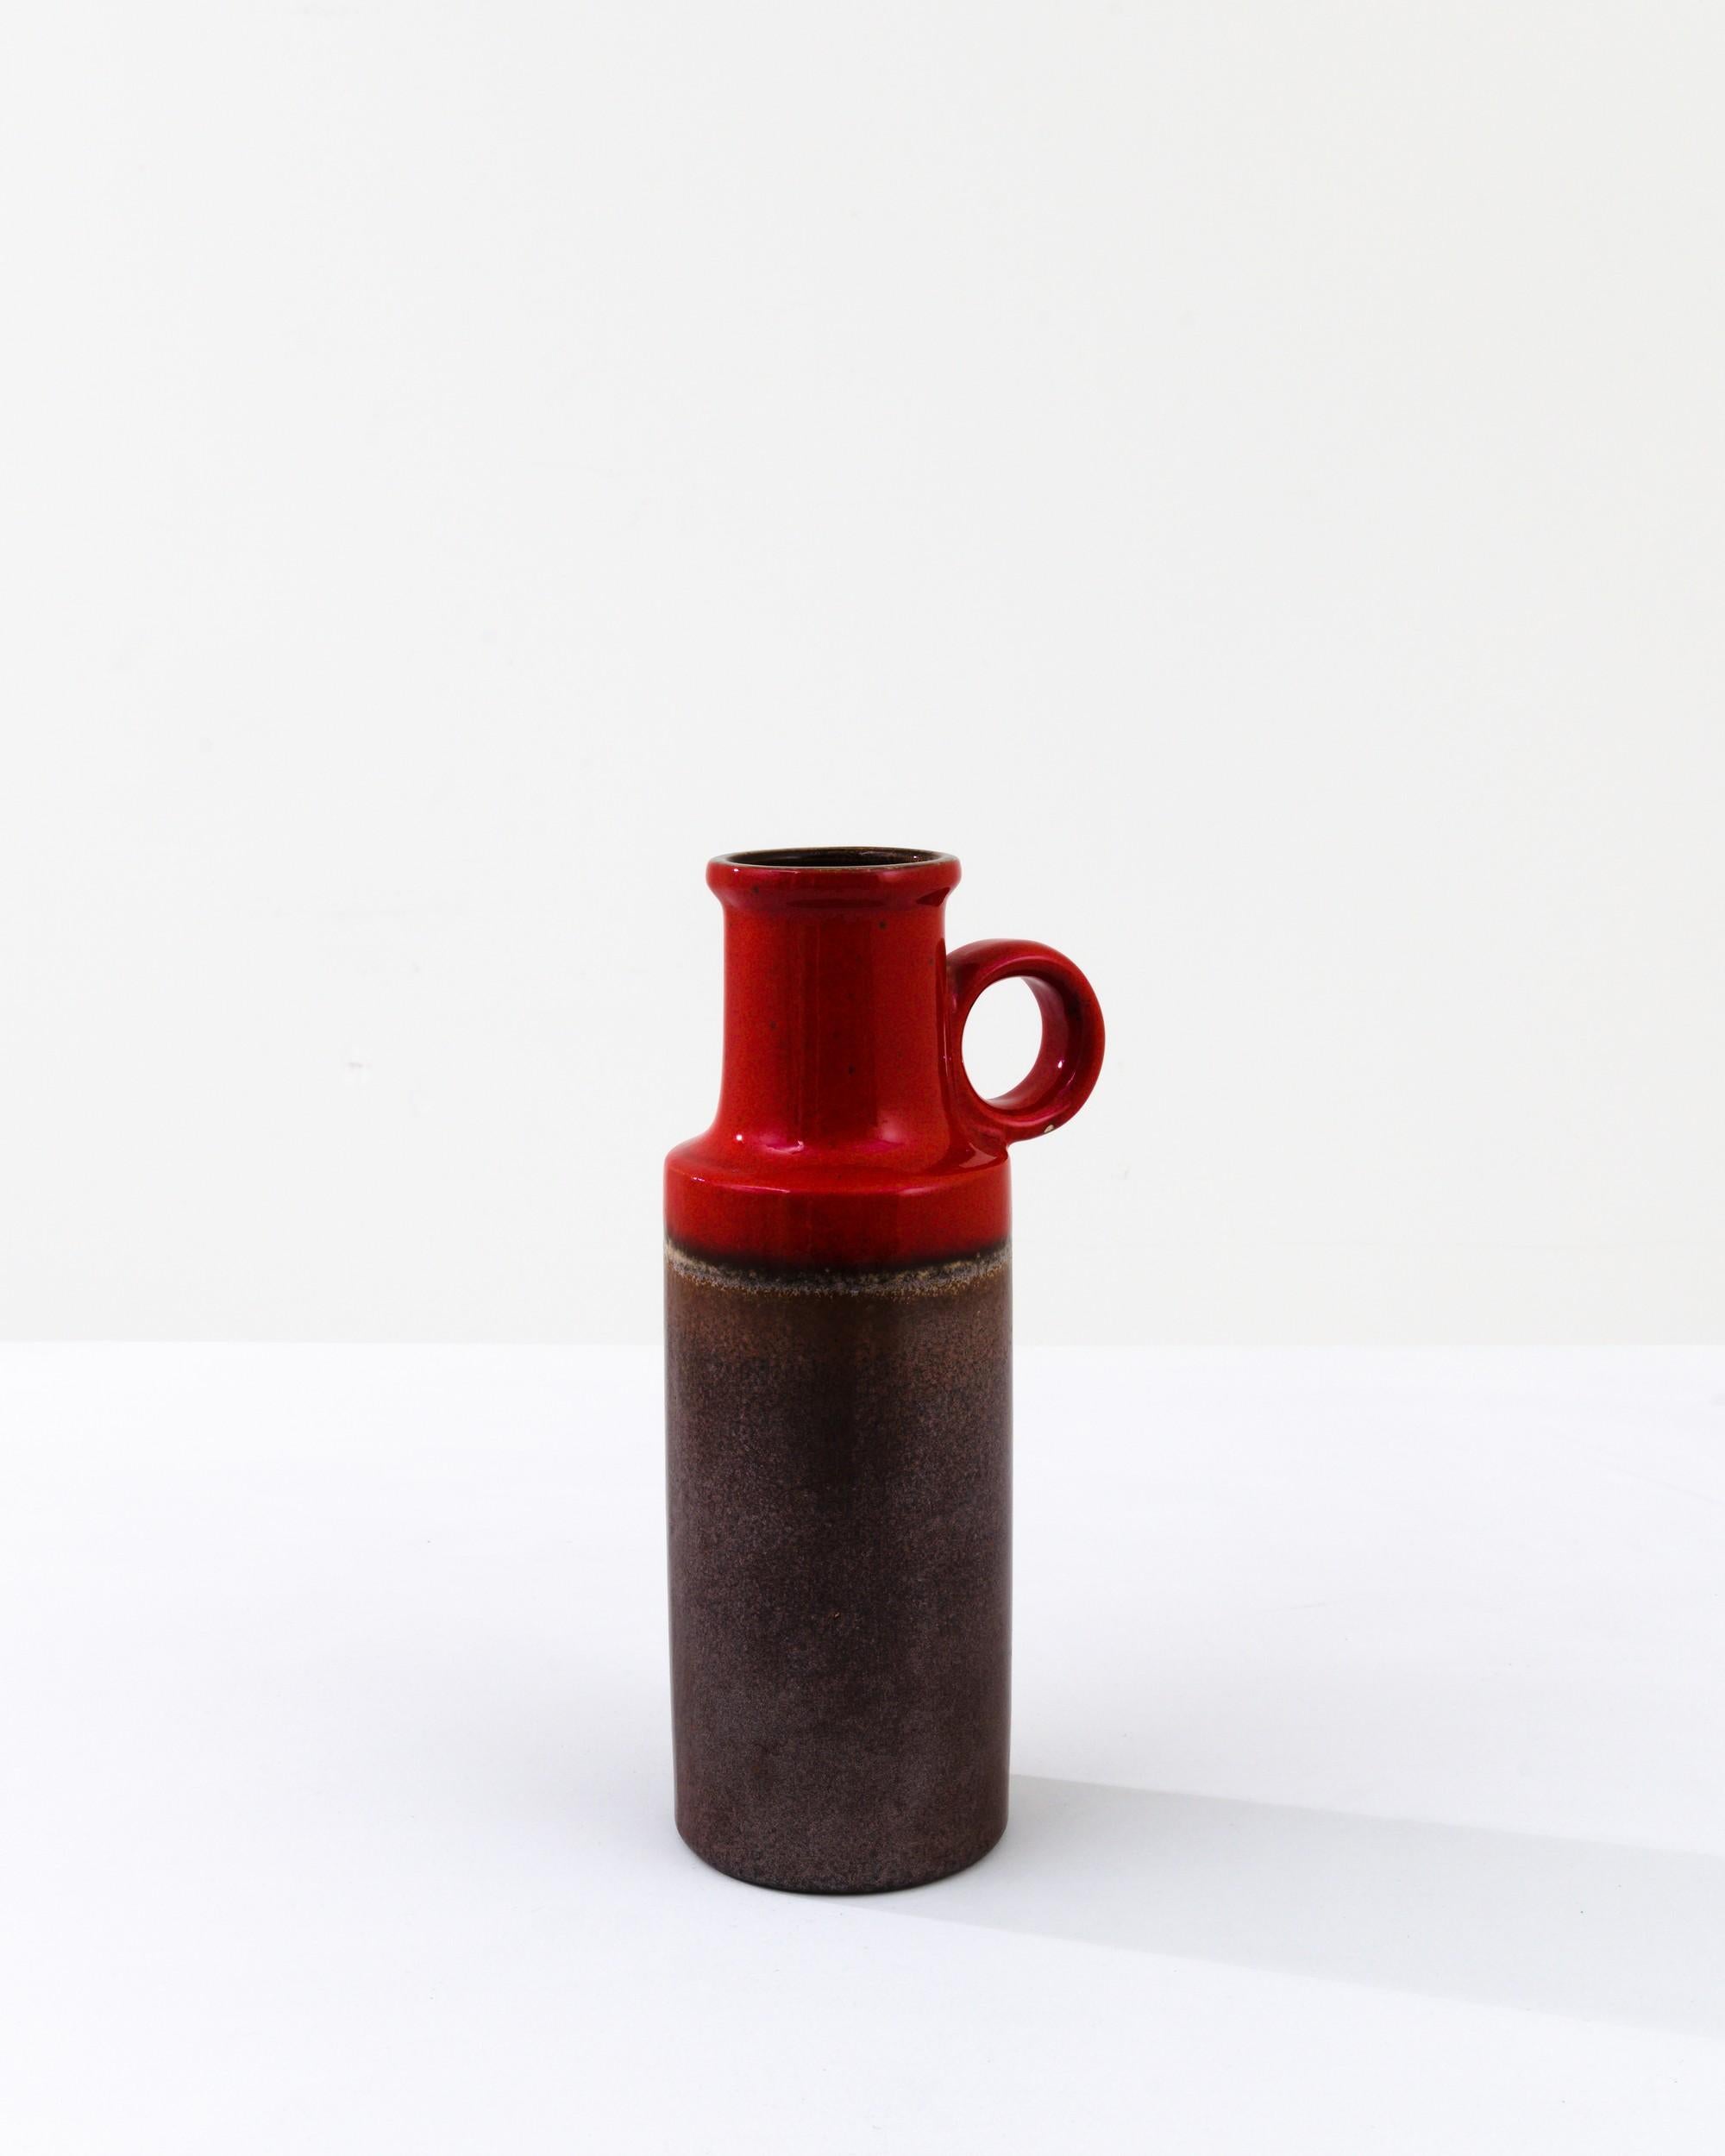 A ceramic vase from mid-20th century Germany. Neither large nor small, this studio made pot reflects the hand-held, and the handmade; the tactility of process and the artist's vision– realized on the potter’s wheel. A classic shape is enhanced by